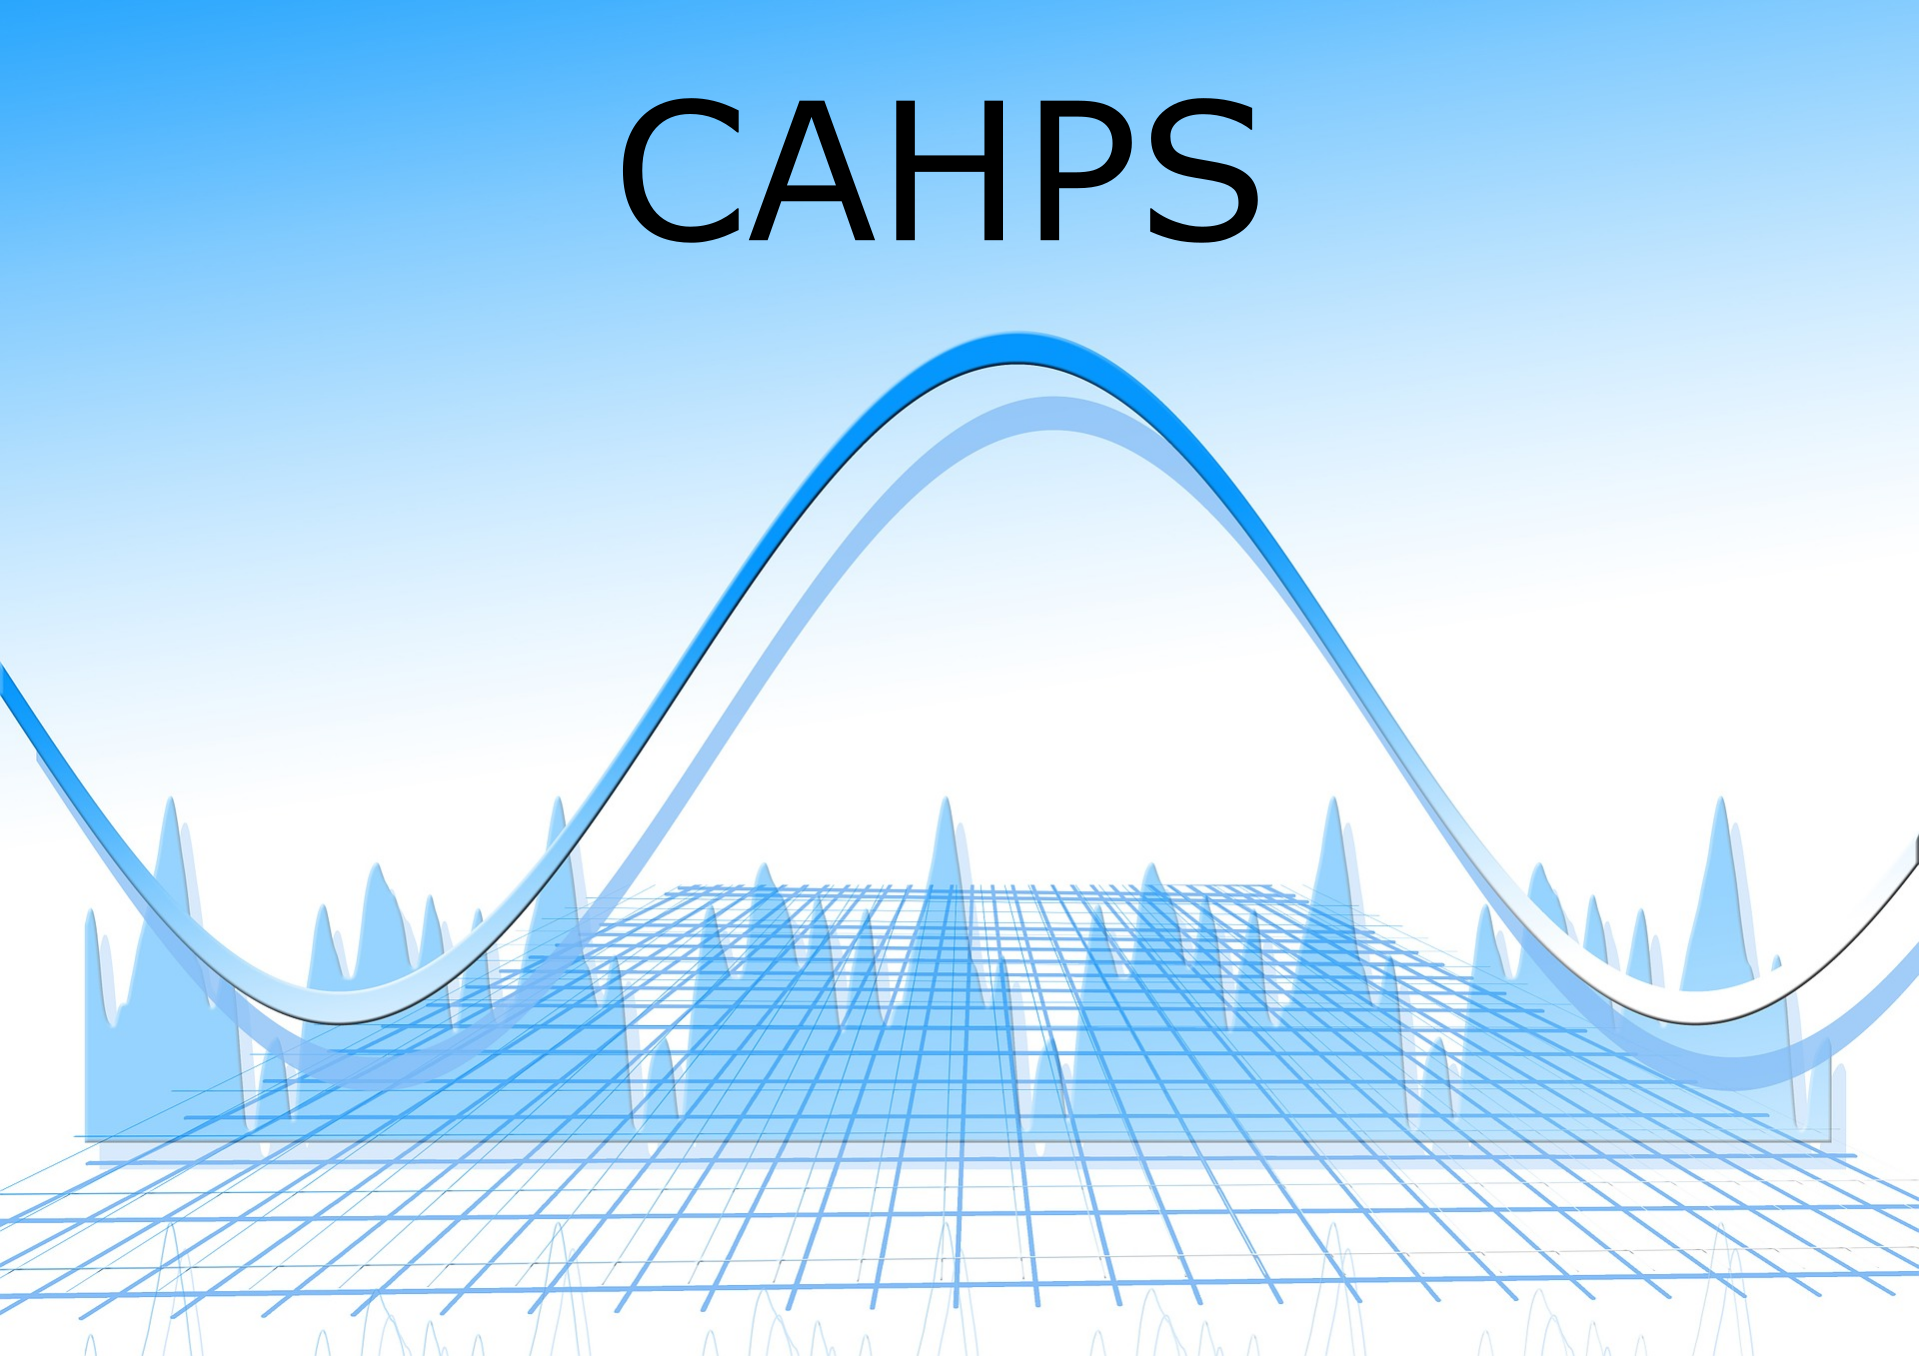 Click this image for CAHPS Help